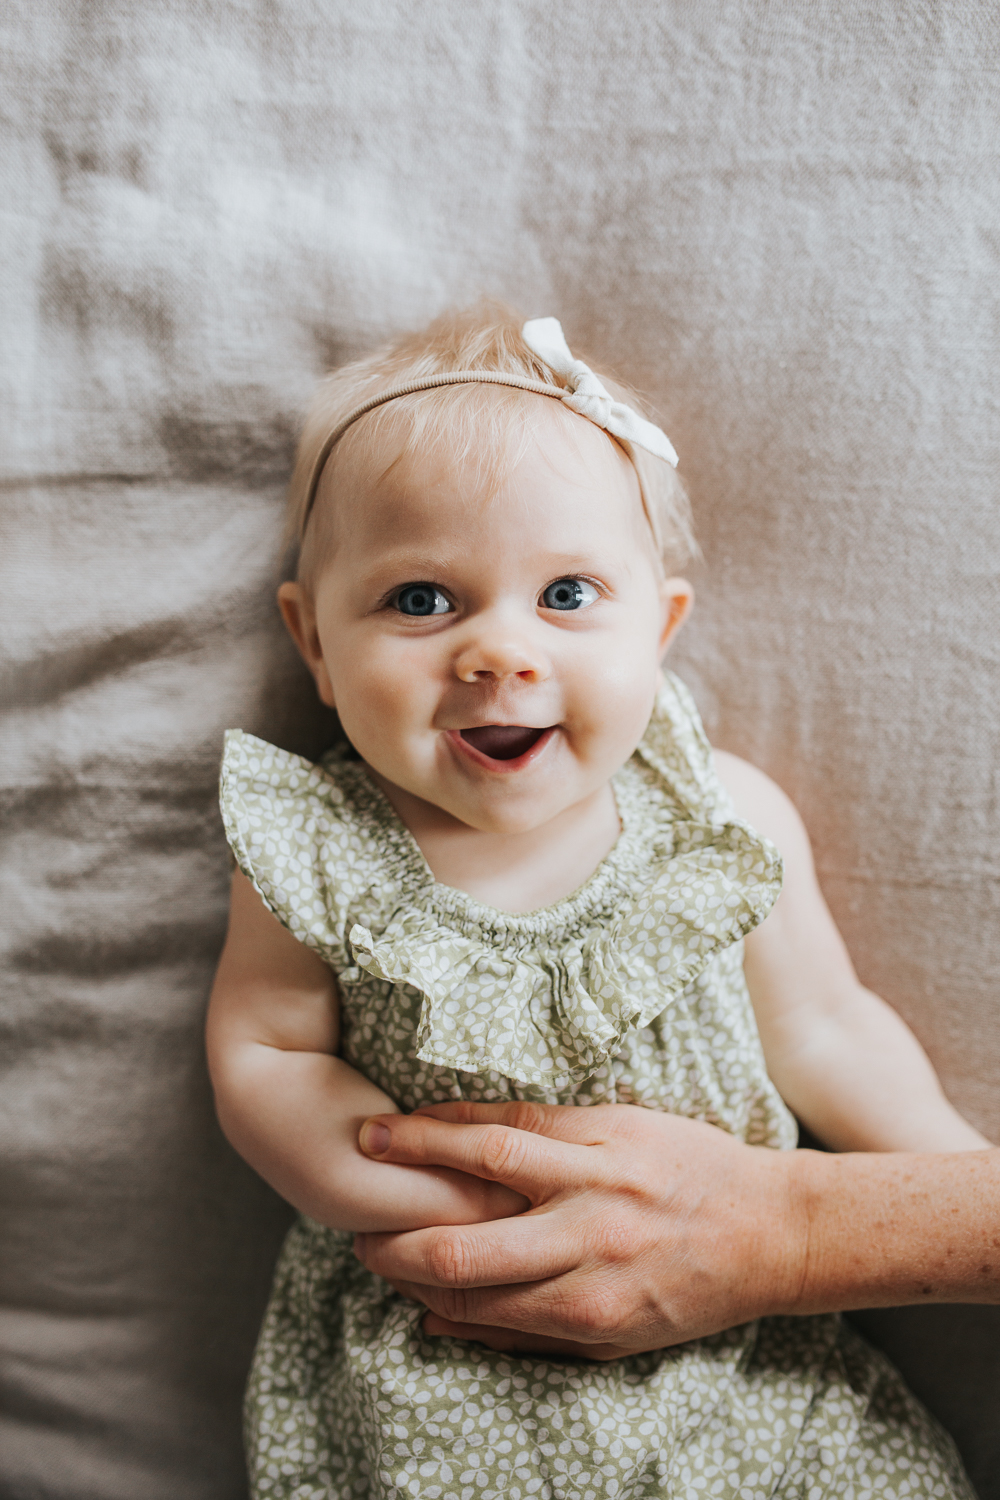 Lexica - 6 month old baby boy, with white skin, blue eyes, golden hair,  happy bigger smile